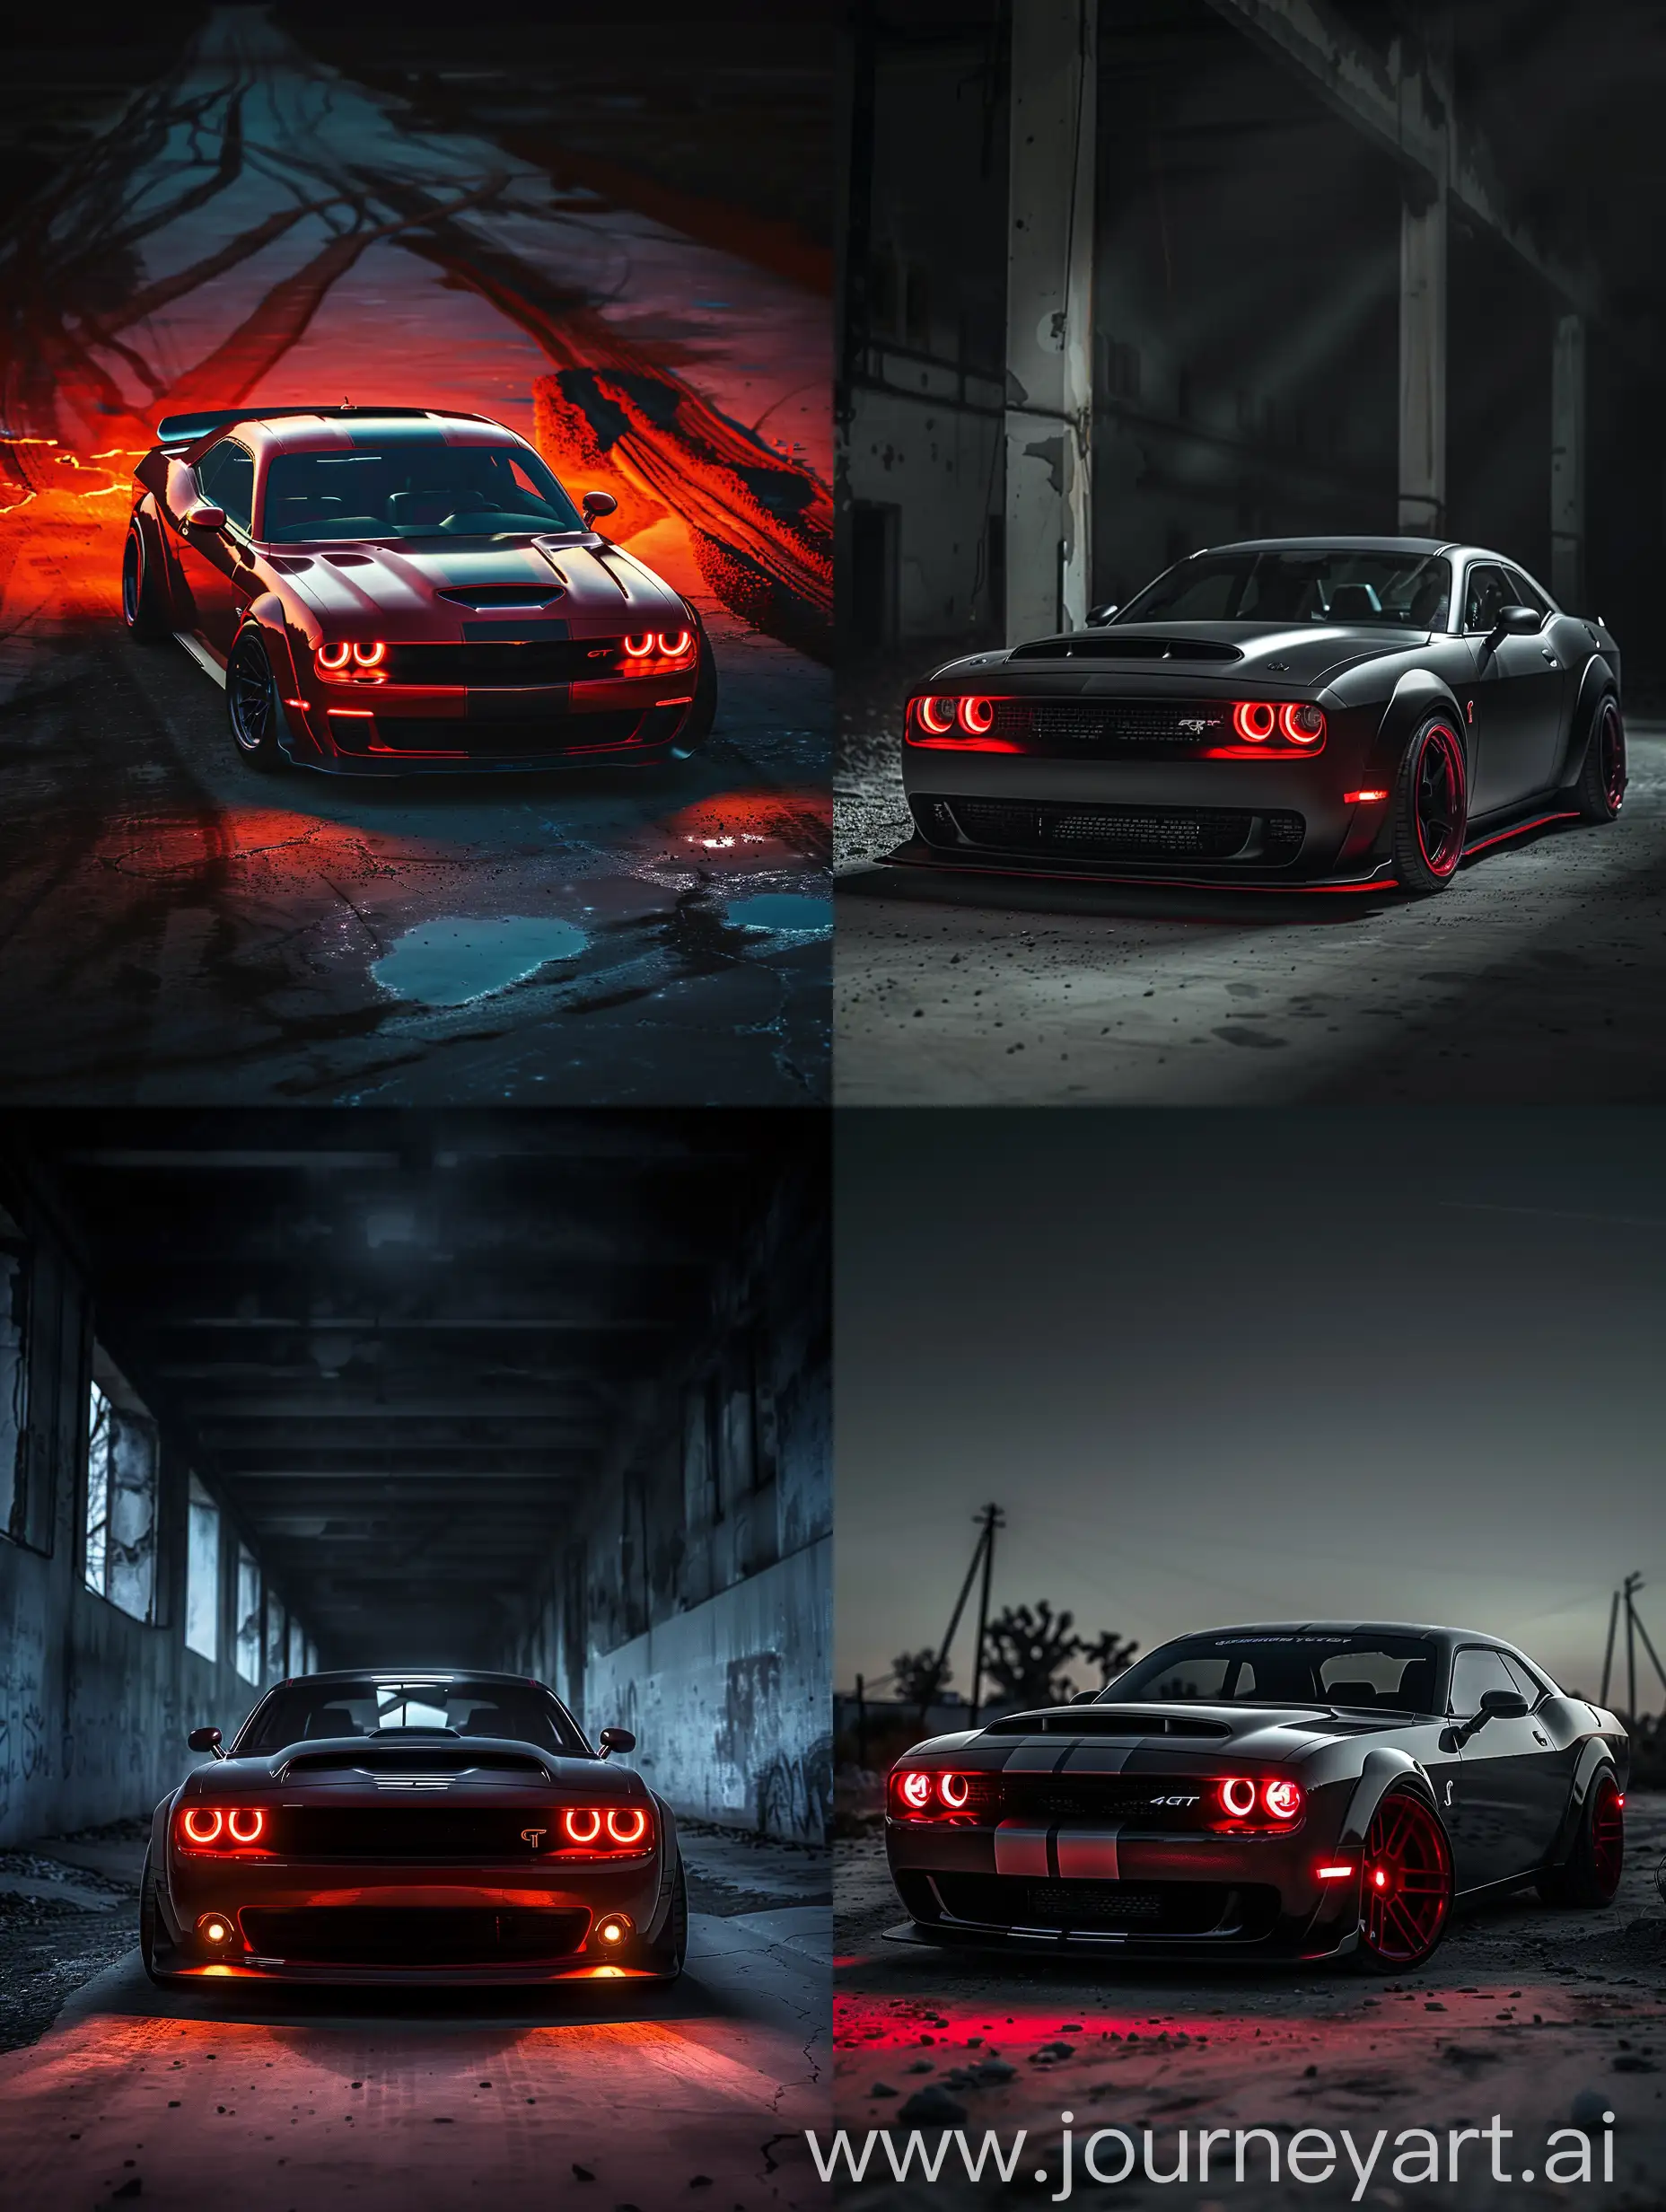 Ford Mustang GT, masterpiece, 4k, dodge challenger demon photo, red headlights, red, sports car with muscles, demon, tires, shadows, cinematic lighting, headlights on, telephoto lenses, wasteland, darkness, wallpaper level, hdr, racer